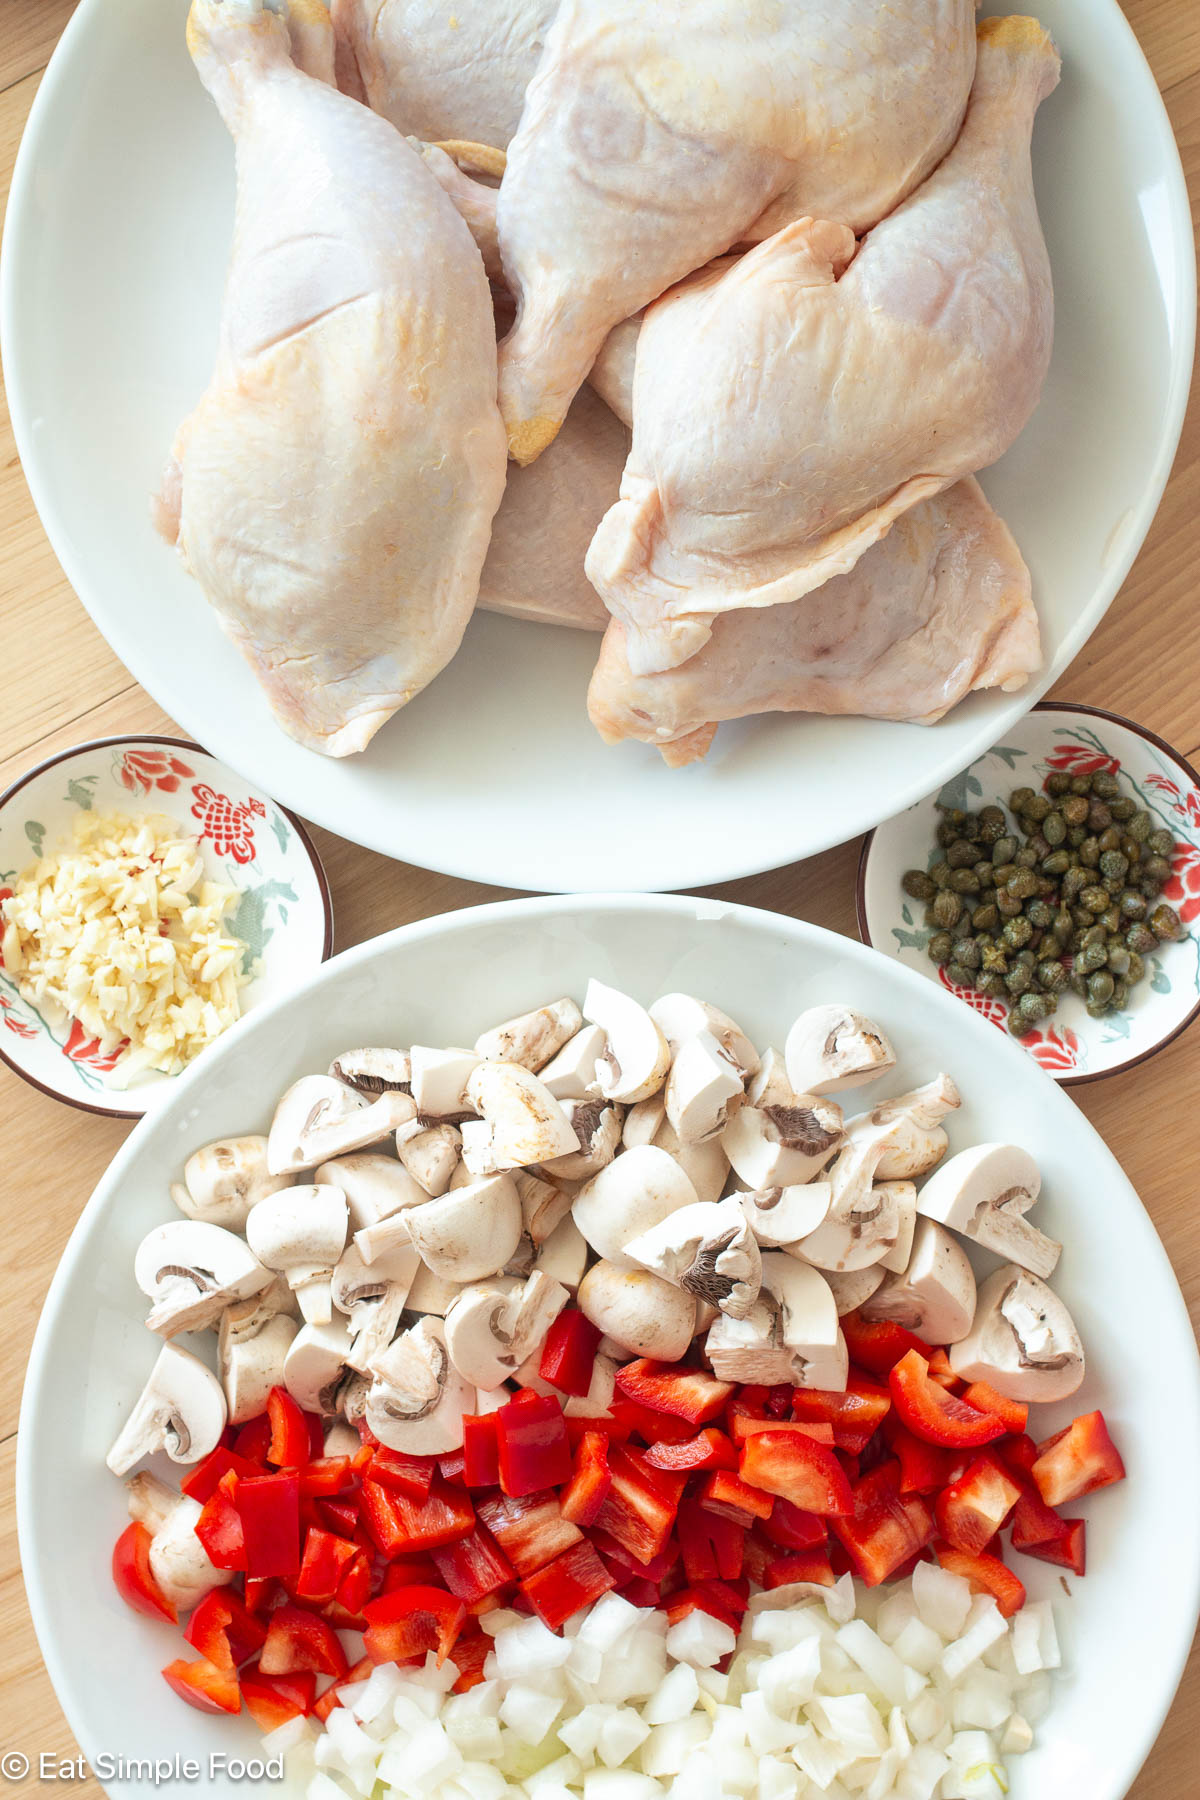 Top down view of ingredients: 5 chicken legs on a white plate; diced mushrooms, red peppers, and onions on a white plate, a small container of capers, and a small container of diced garlic.